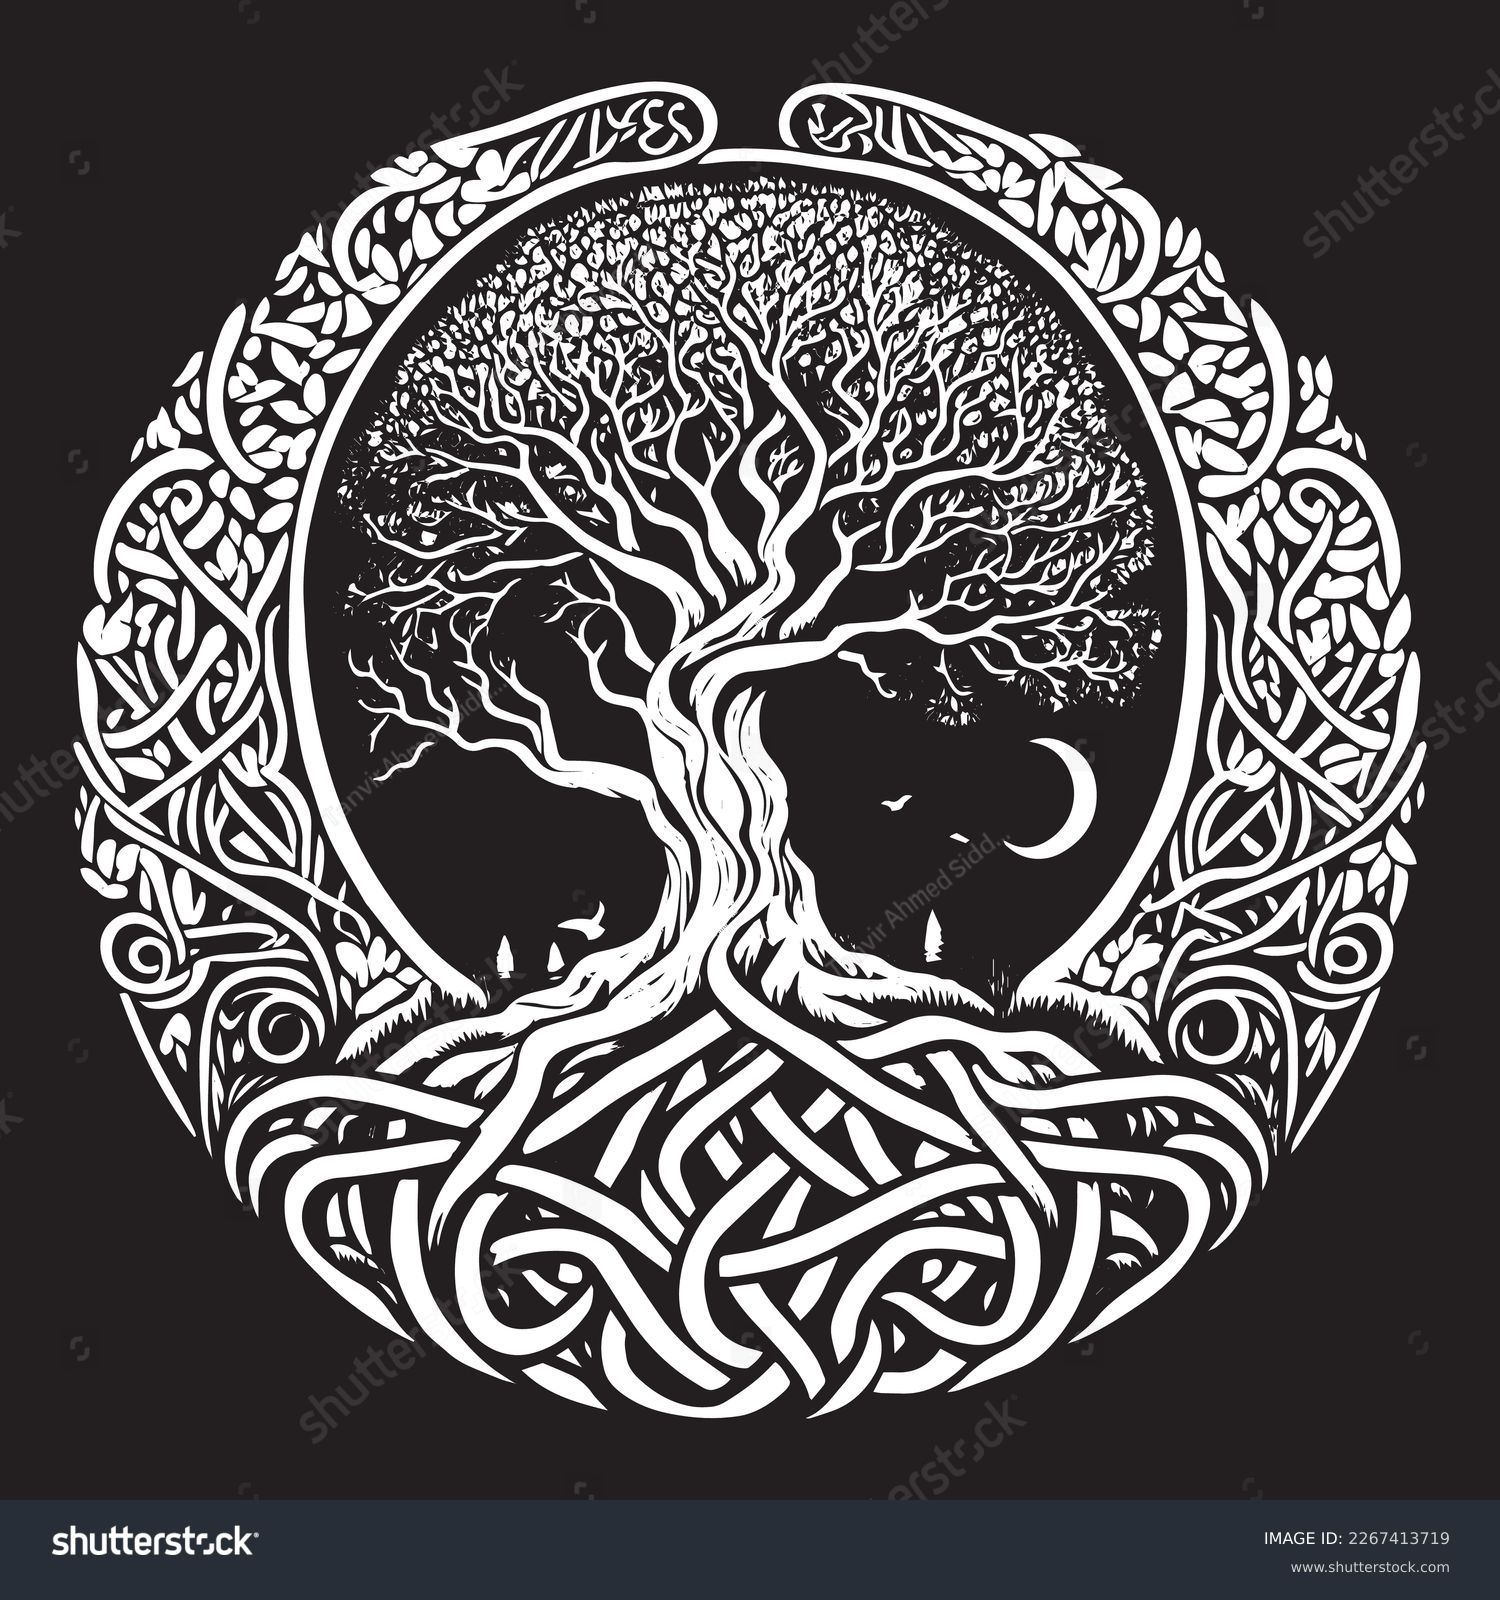 Celtic tree of life decorative Vector ornament, Graphic arts, dot work. Grunge vector illustration of the Scandinavian myths with Celtic culture. #2267413719